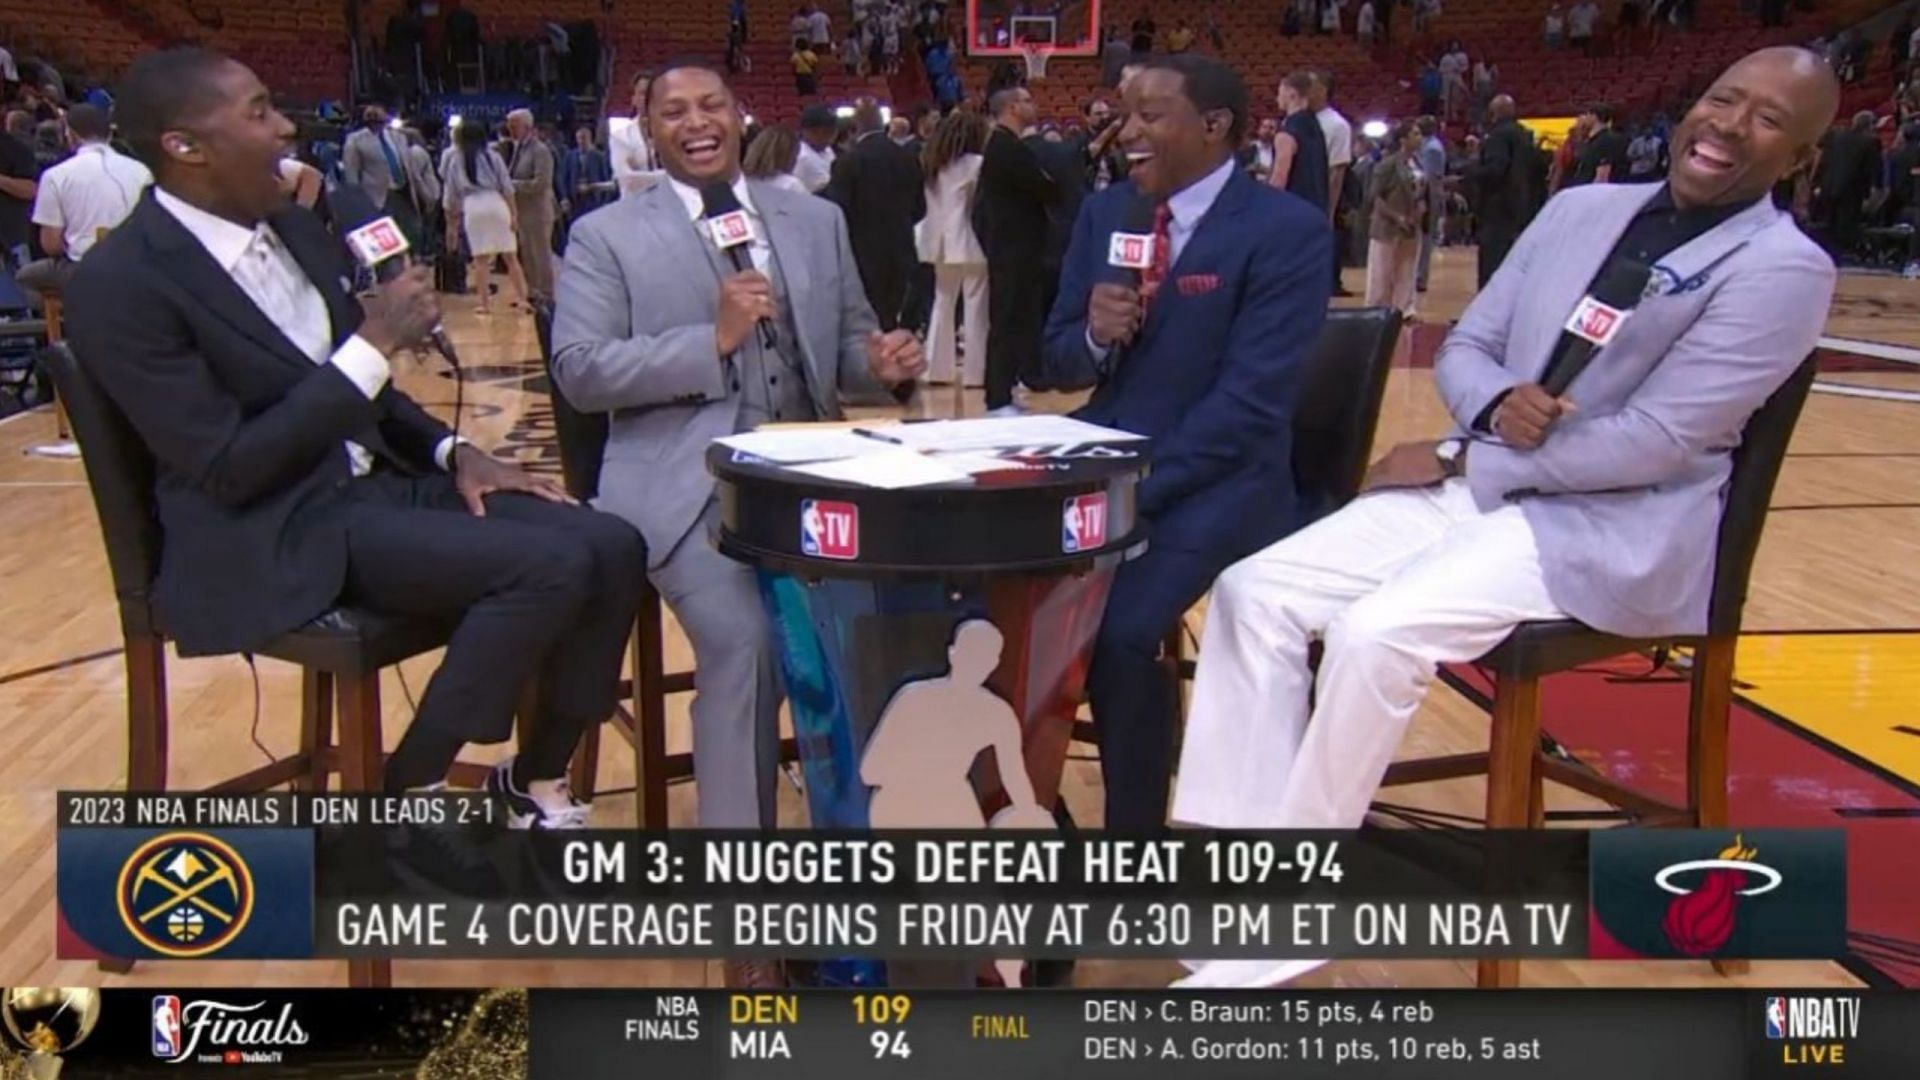 The NBA TV crew discussing Game 3 and predicting Game 4. (Photo: NBA TV/Twitter)